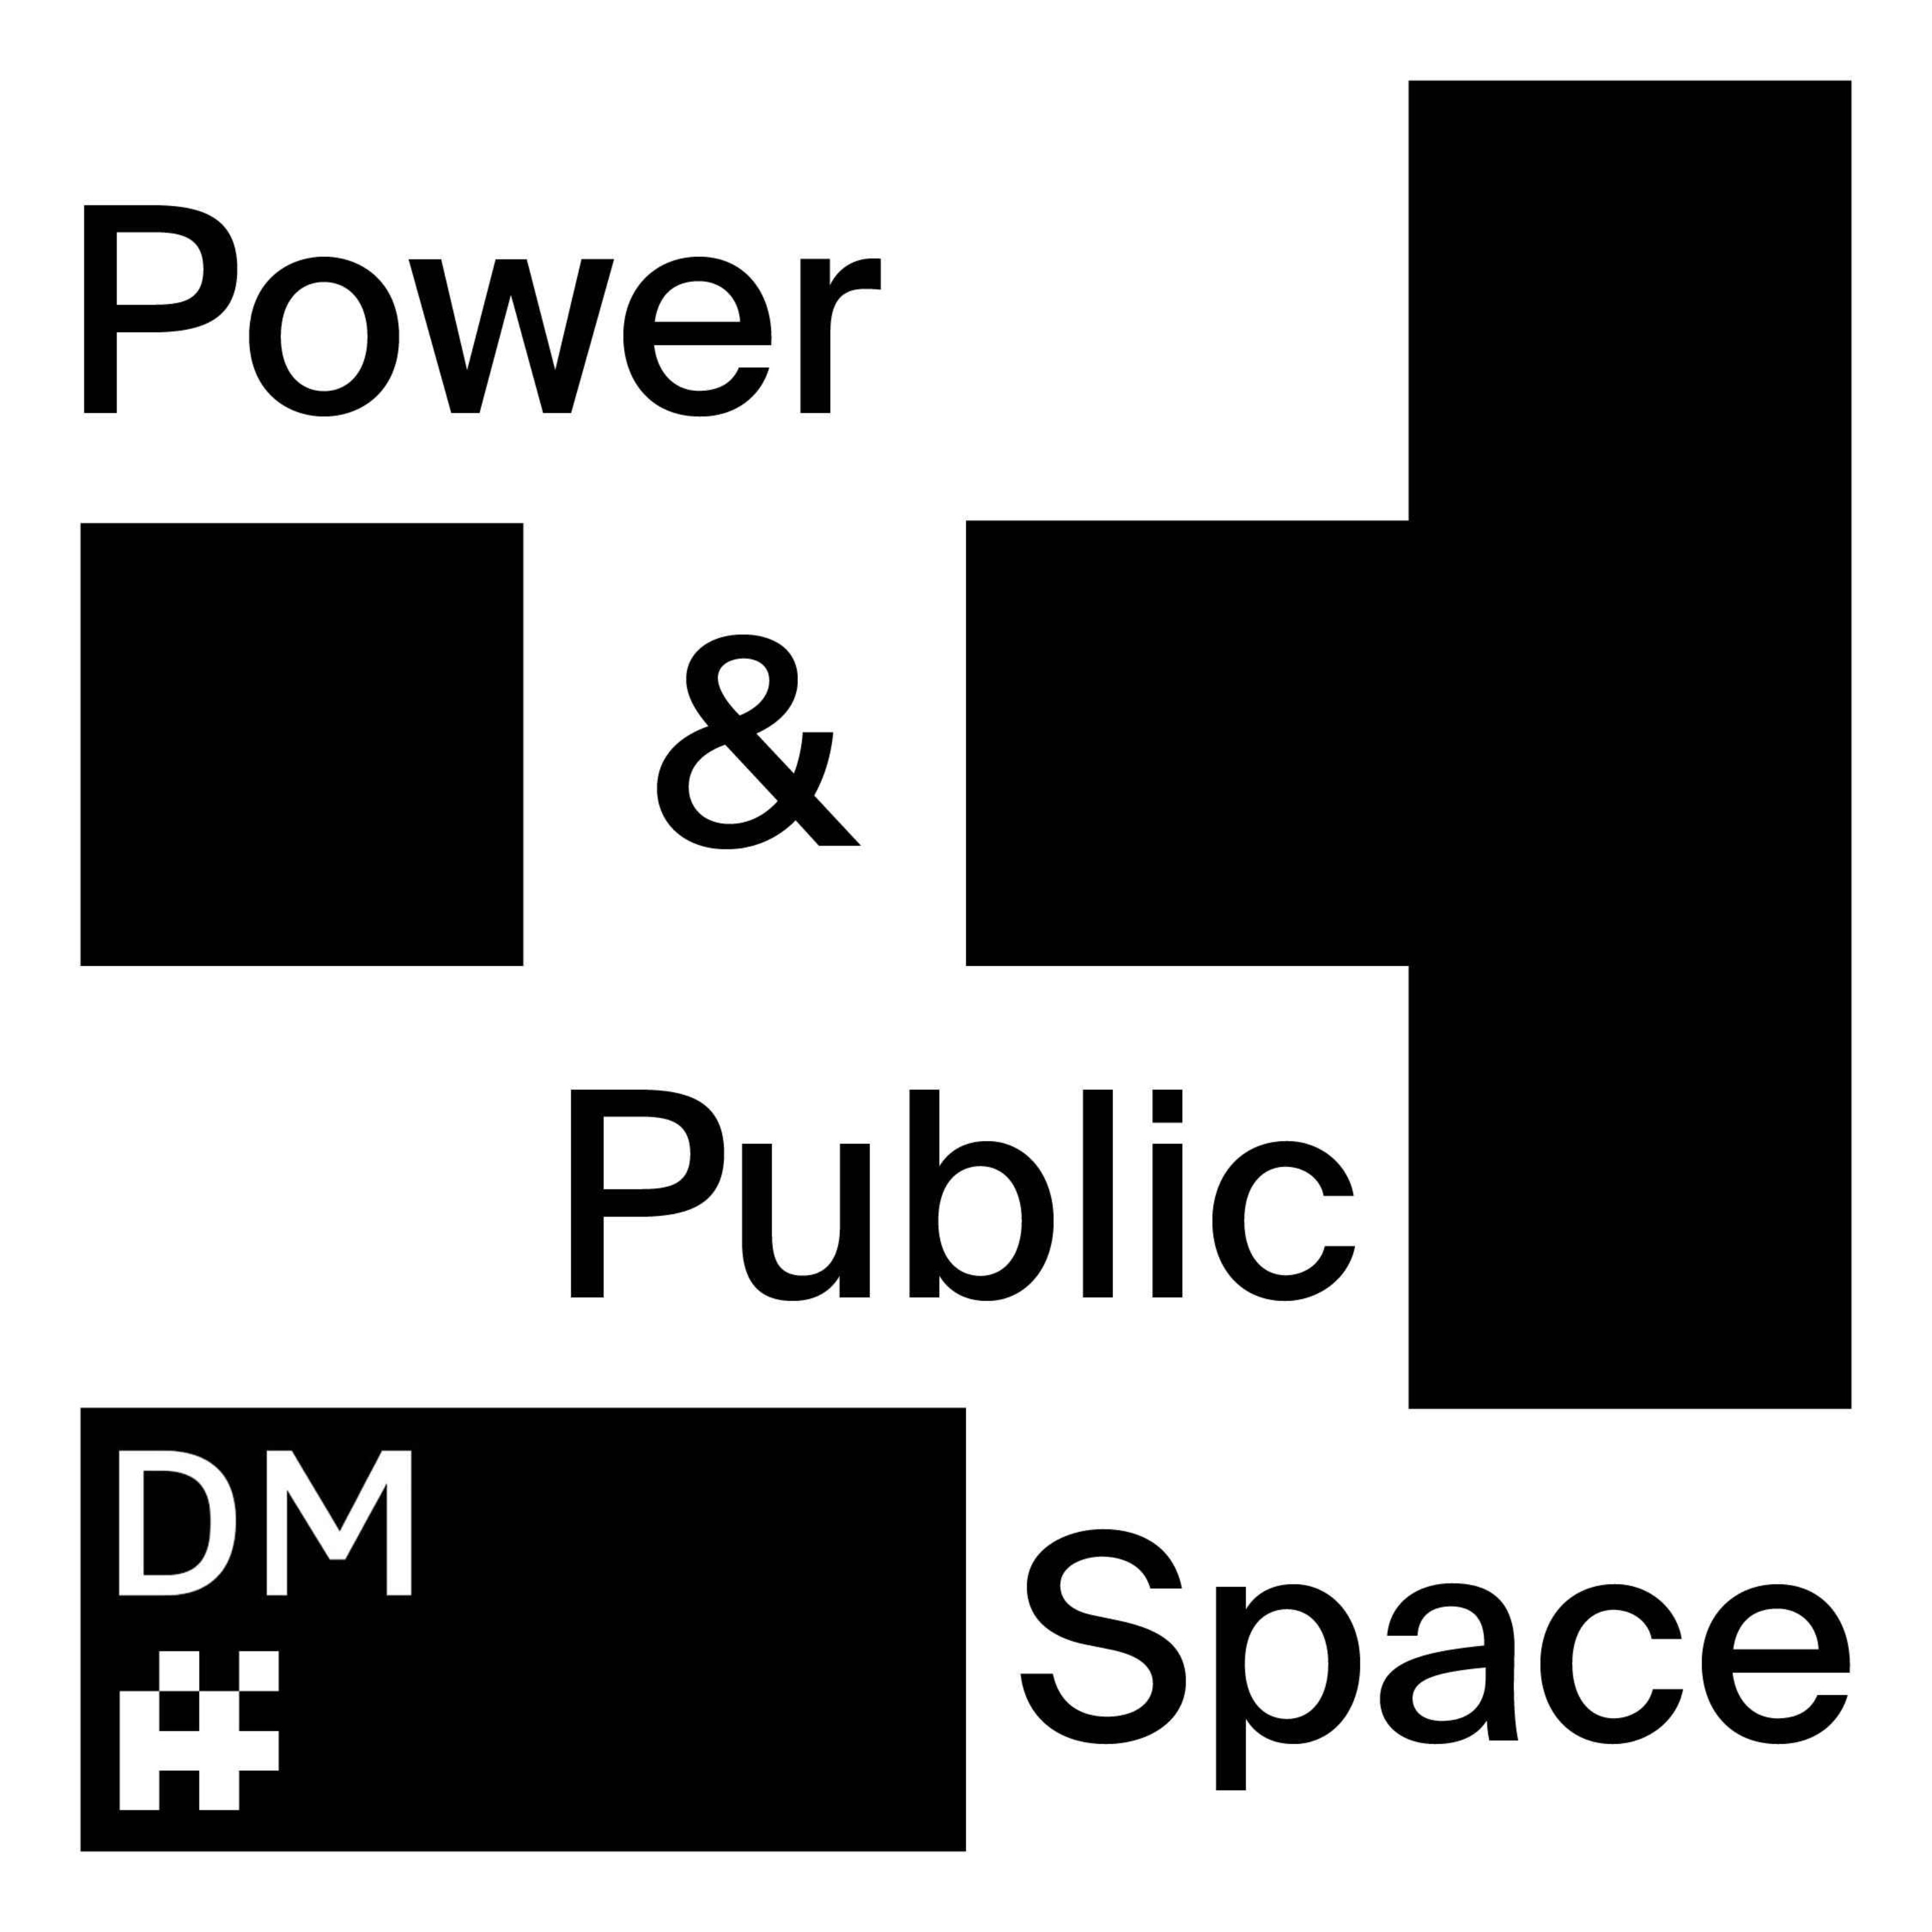 Introducing: Power & Public Space